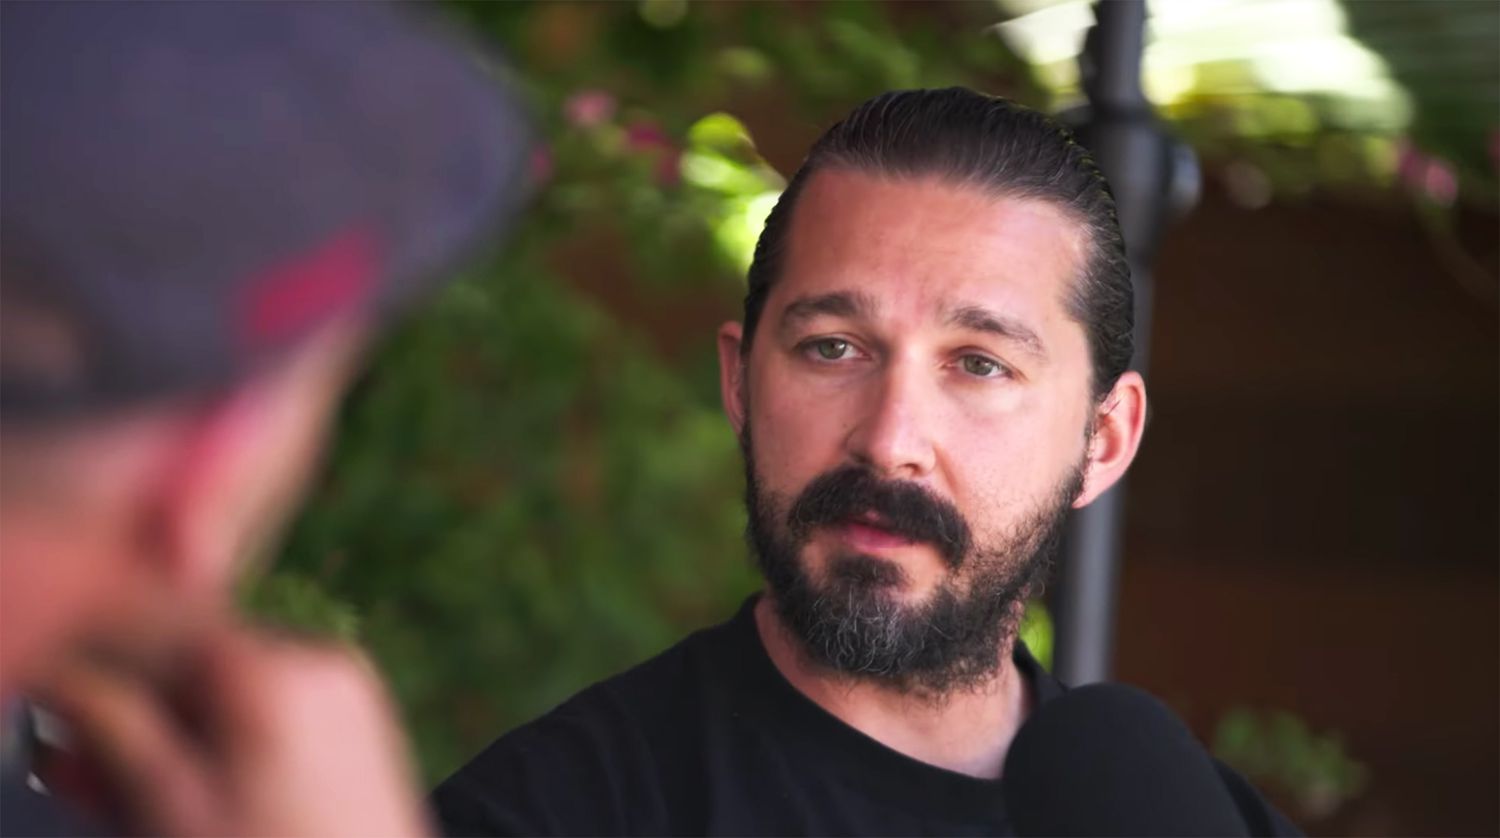 Shia LaBeouf Confirmed into Catholic Church, Reportedly Intends to Become a Deacon